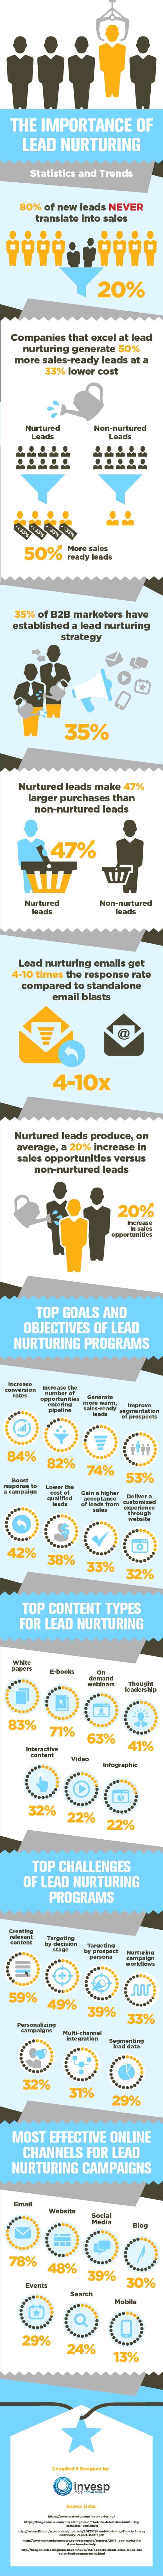 The importance of lead nurturing